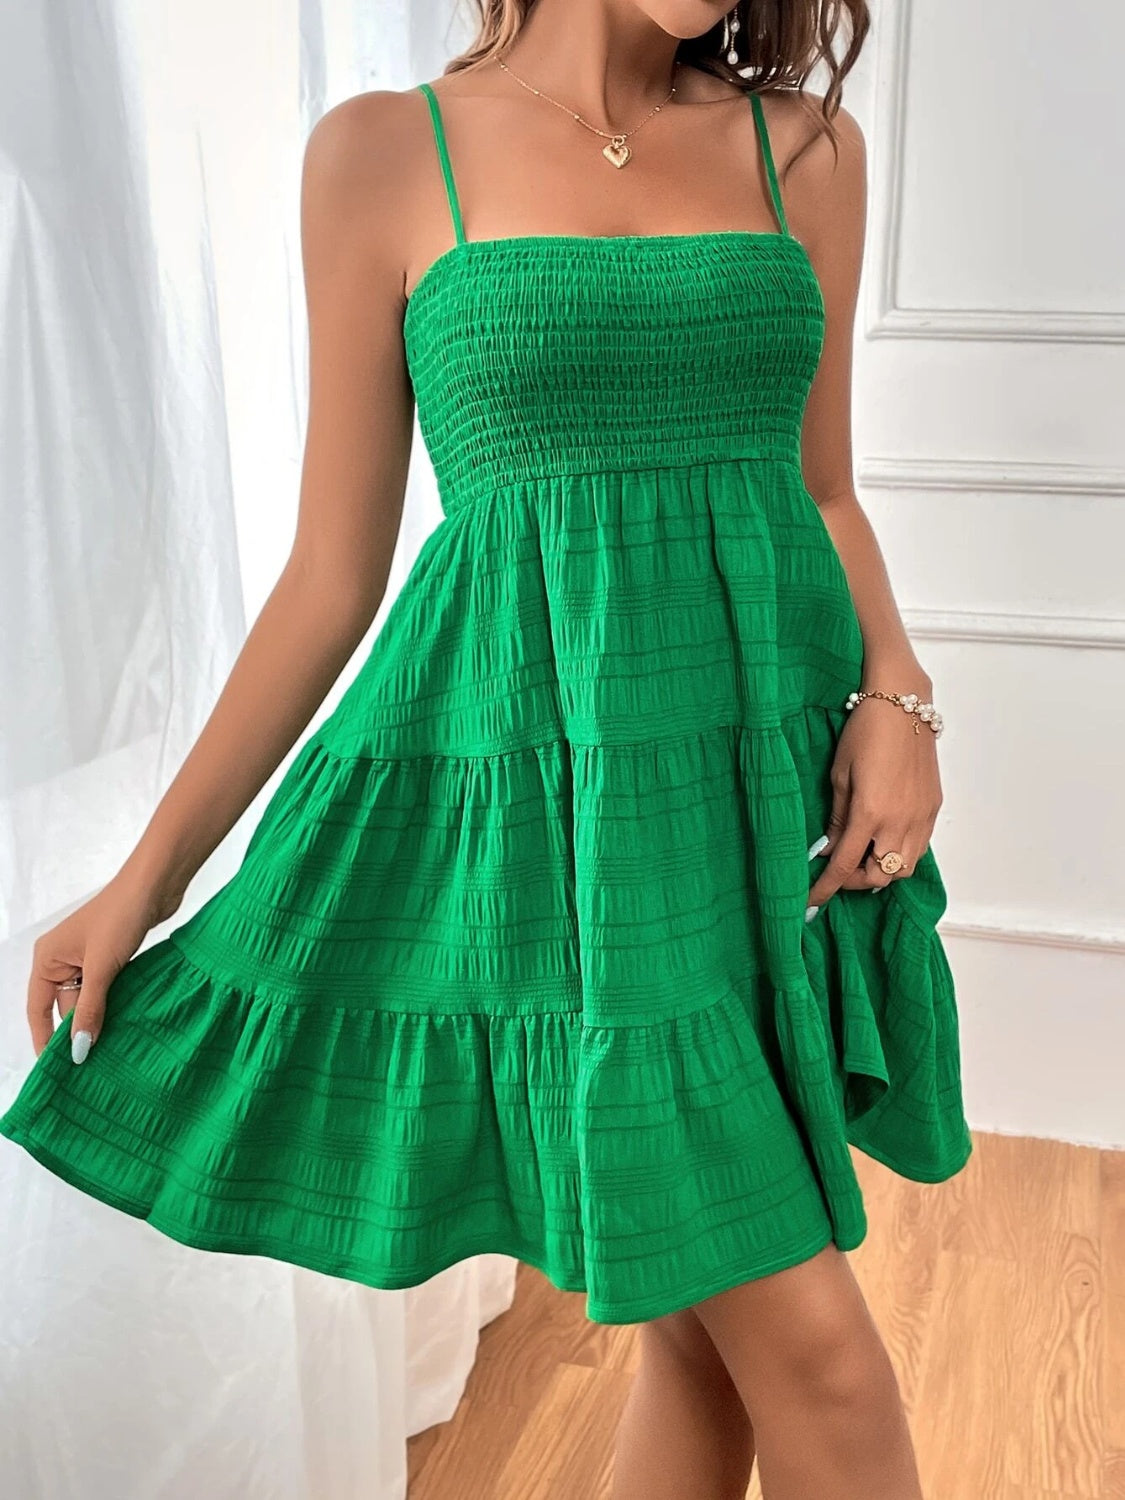 Chic sleeveless smocked green dress with tiered skirt, perfect for summer. Available in 8 colors. Get yours today!